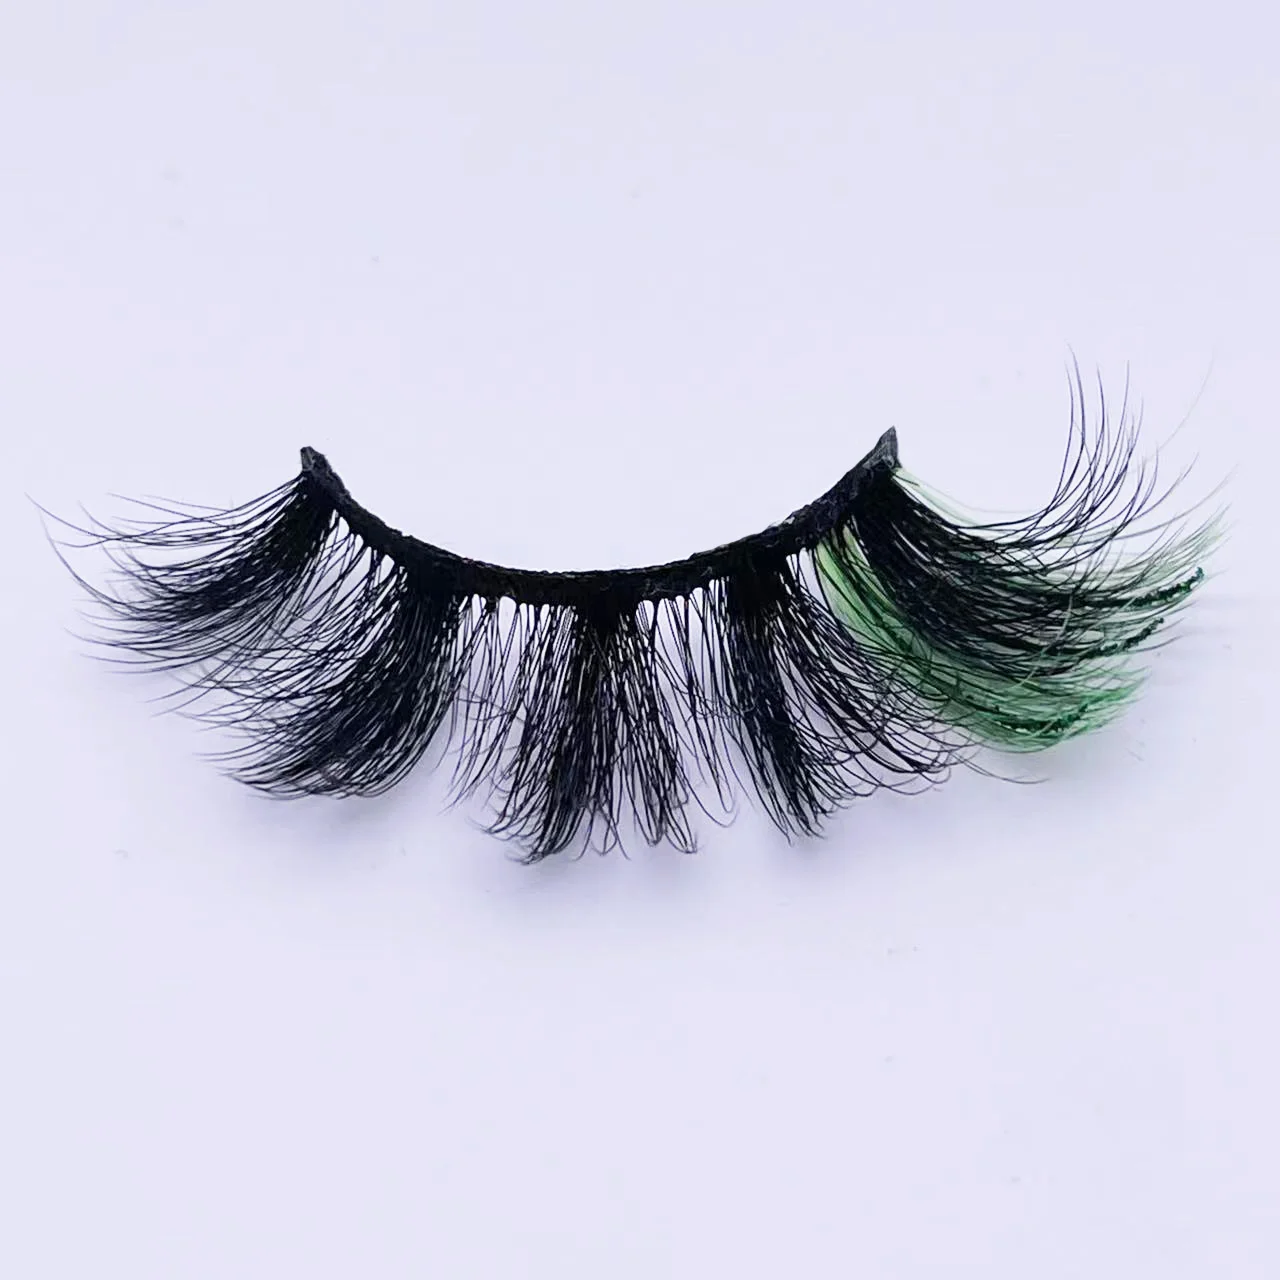 Hbzgtlad Colored Lashes Glitter Mink 15mm -20mm Fluffy Color Streaks Cosplay Makeup Beauty Eyelashes -Outlet Maid Outfit Store S9ab4257f059448ad92bd657cc9213333e.jpg